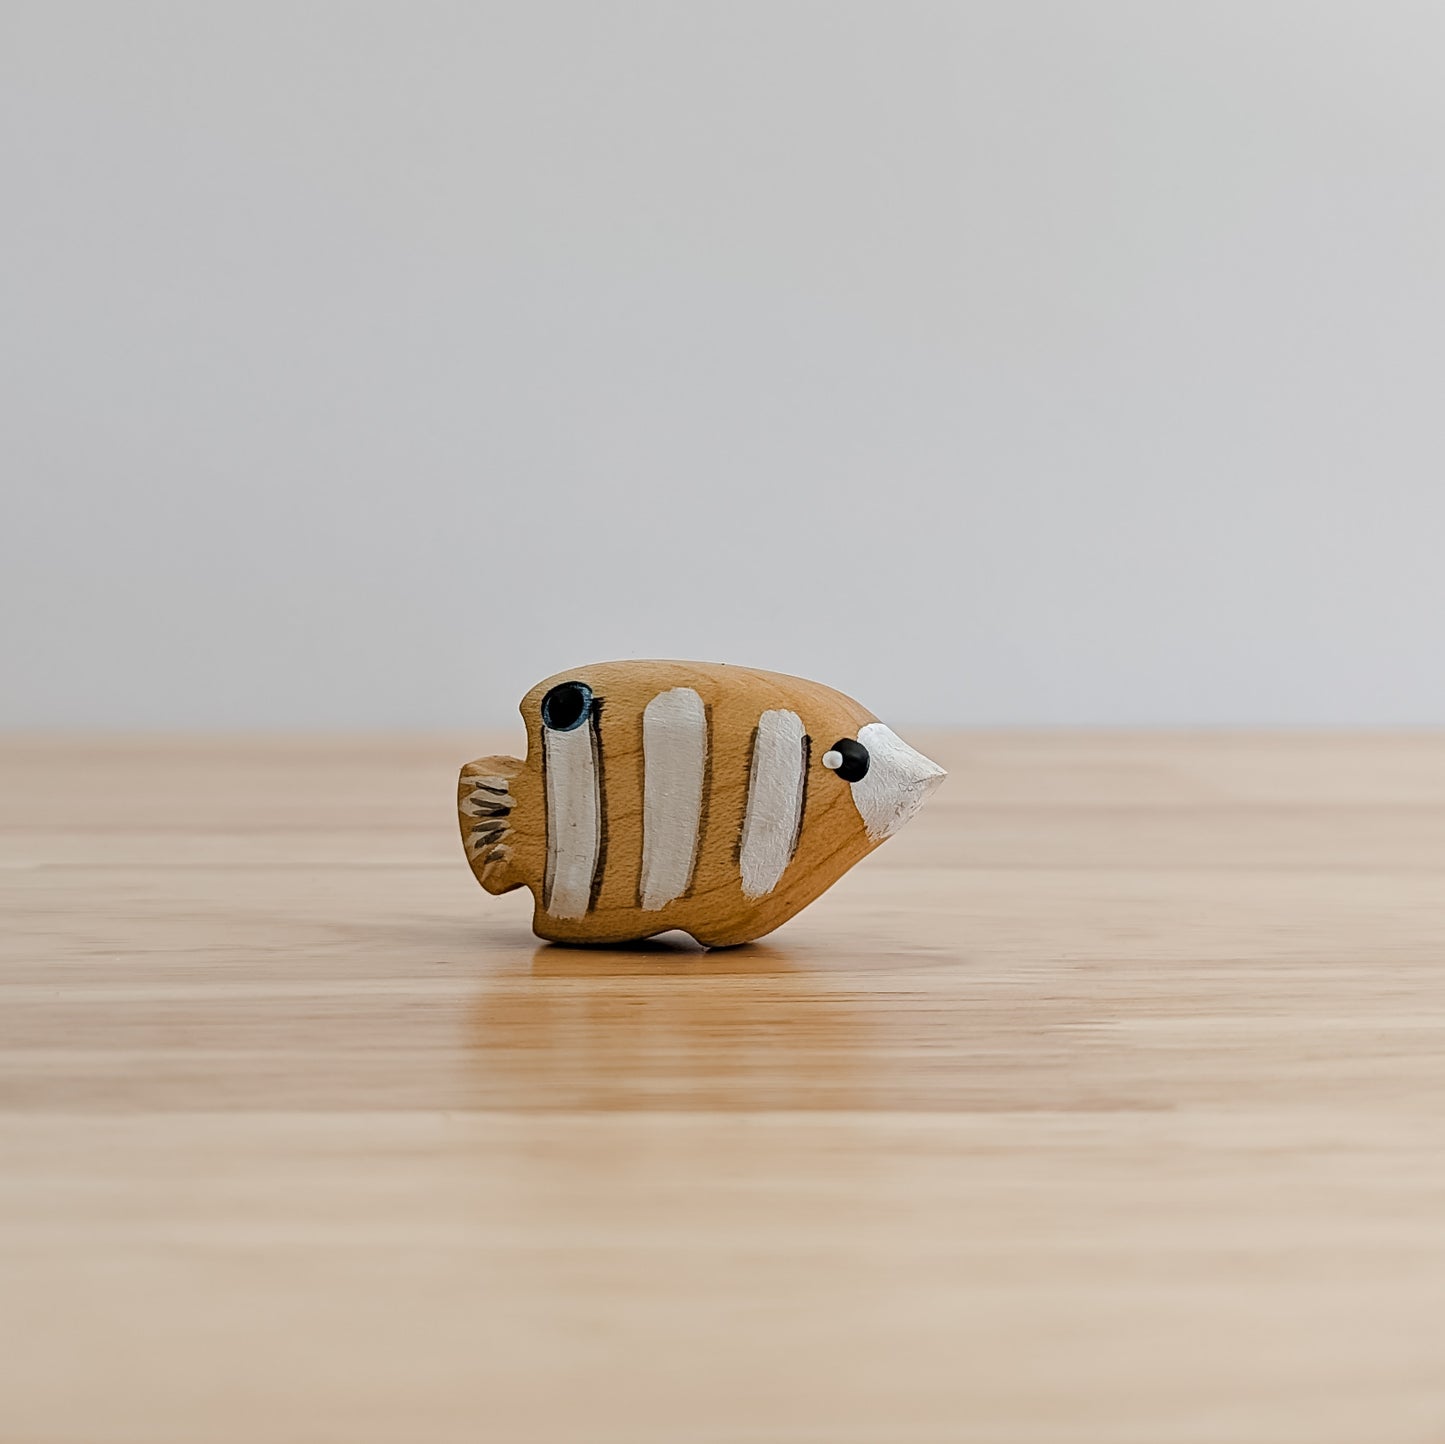 Butterfly Fish Wooden Toy